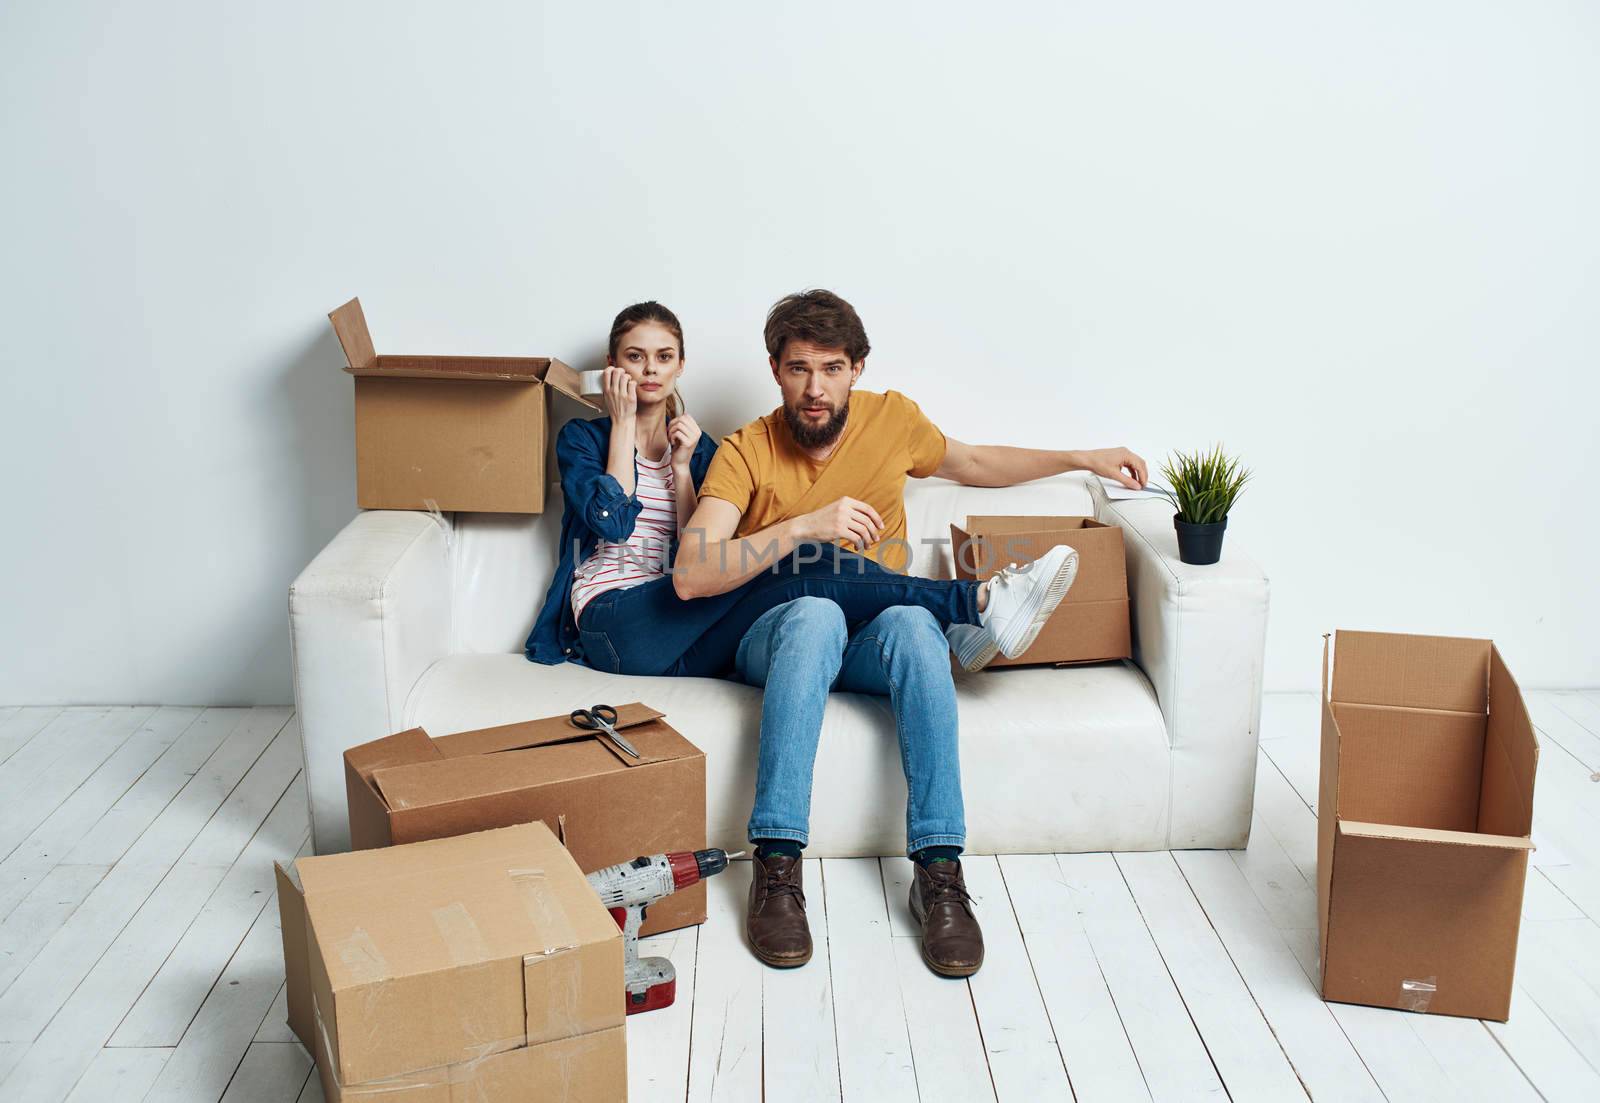 Married couple on a white sofa in the room interior with boxes of communication things. High quality photo